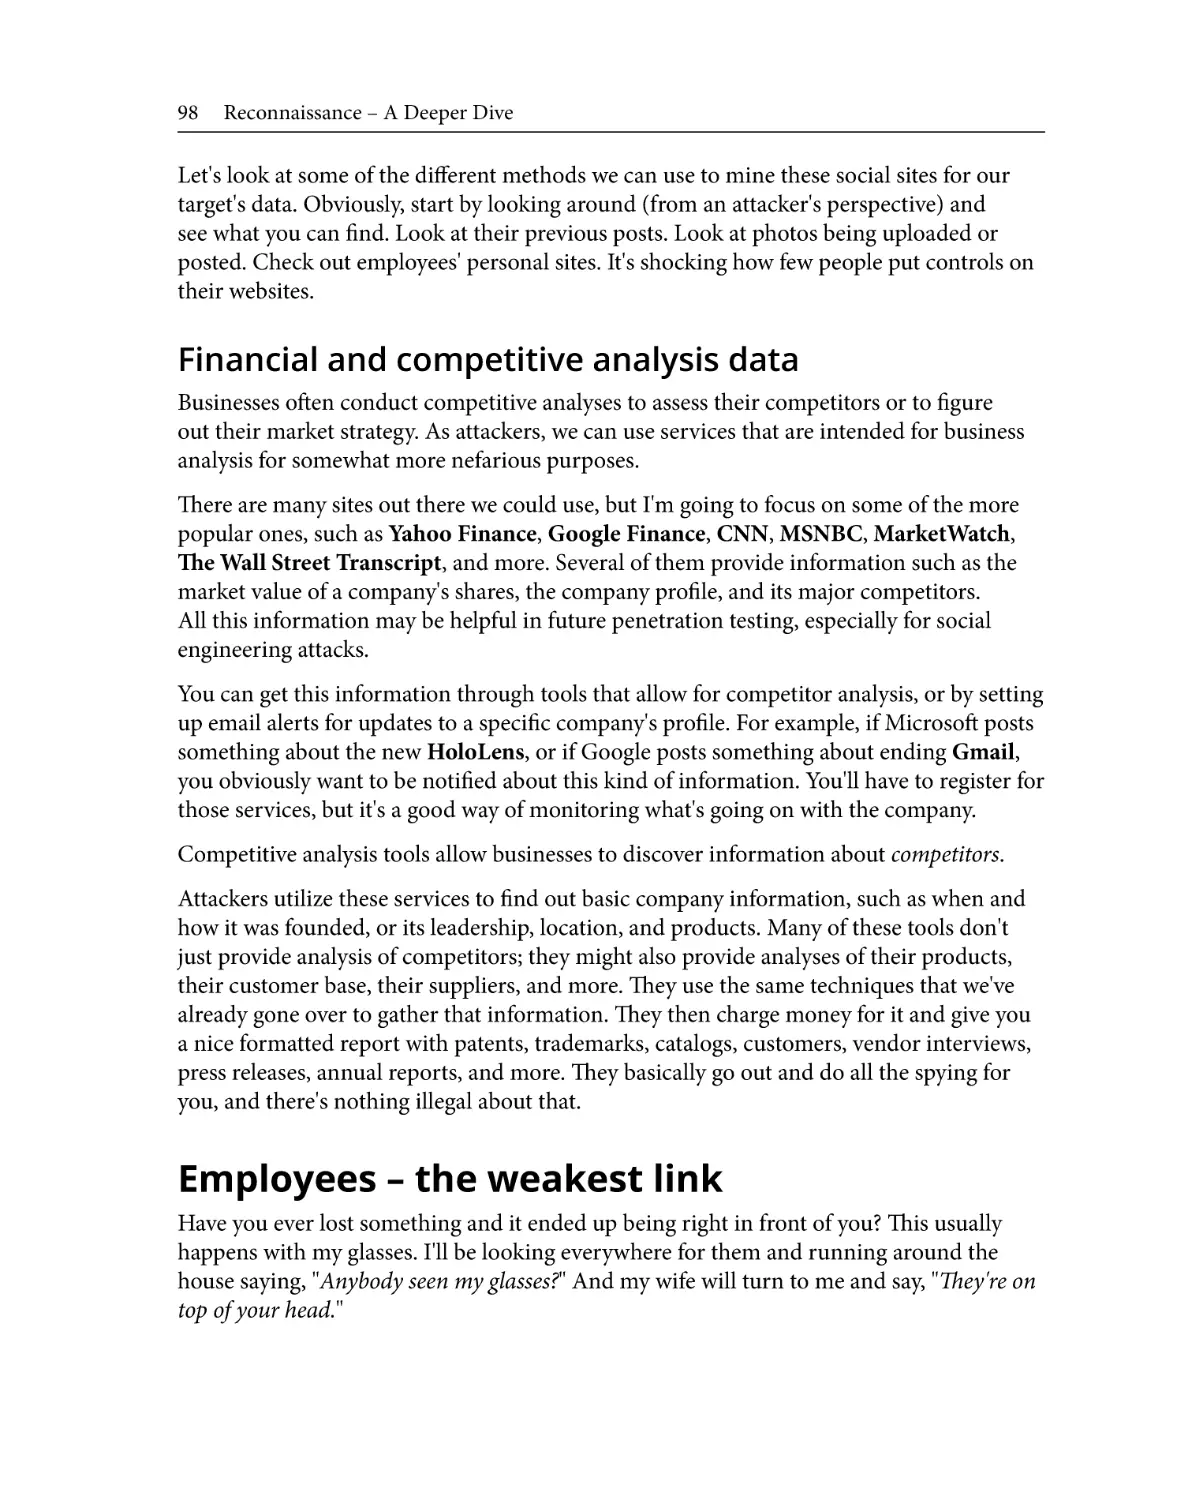 Financial and competitive analysis data
Employees – the weakest link